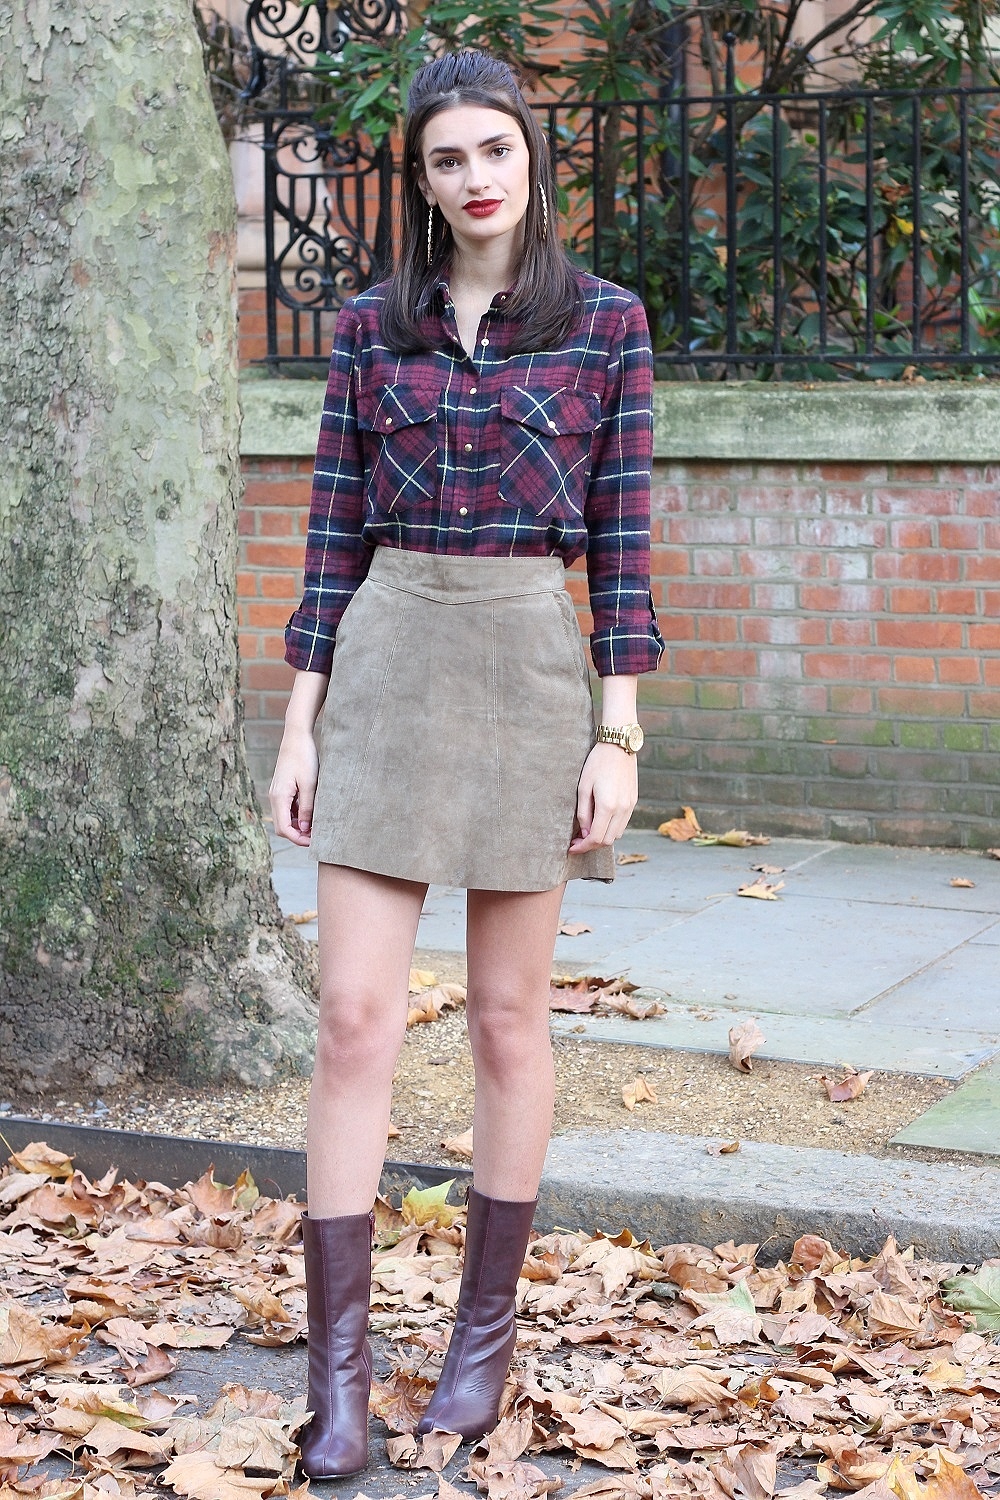 peexo fashion blogger wearing checkered shirt and suede skirt and purple boots